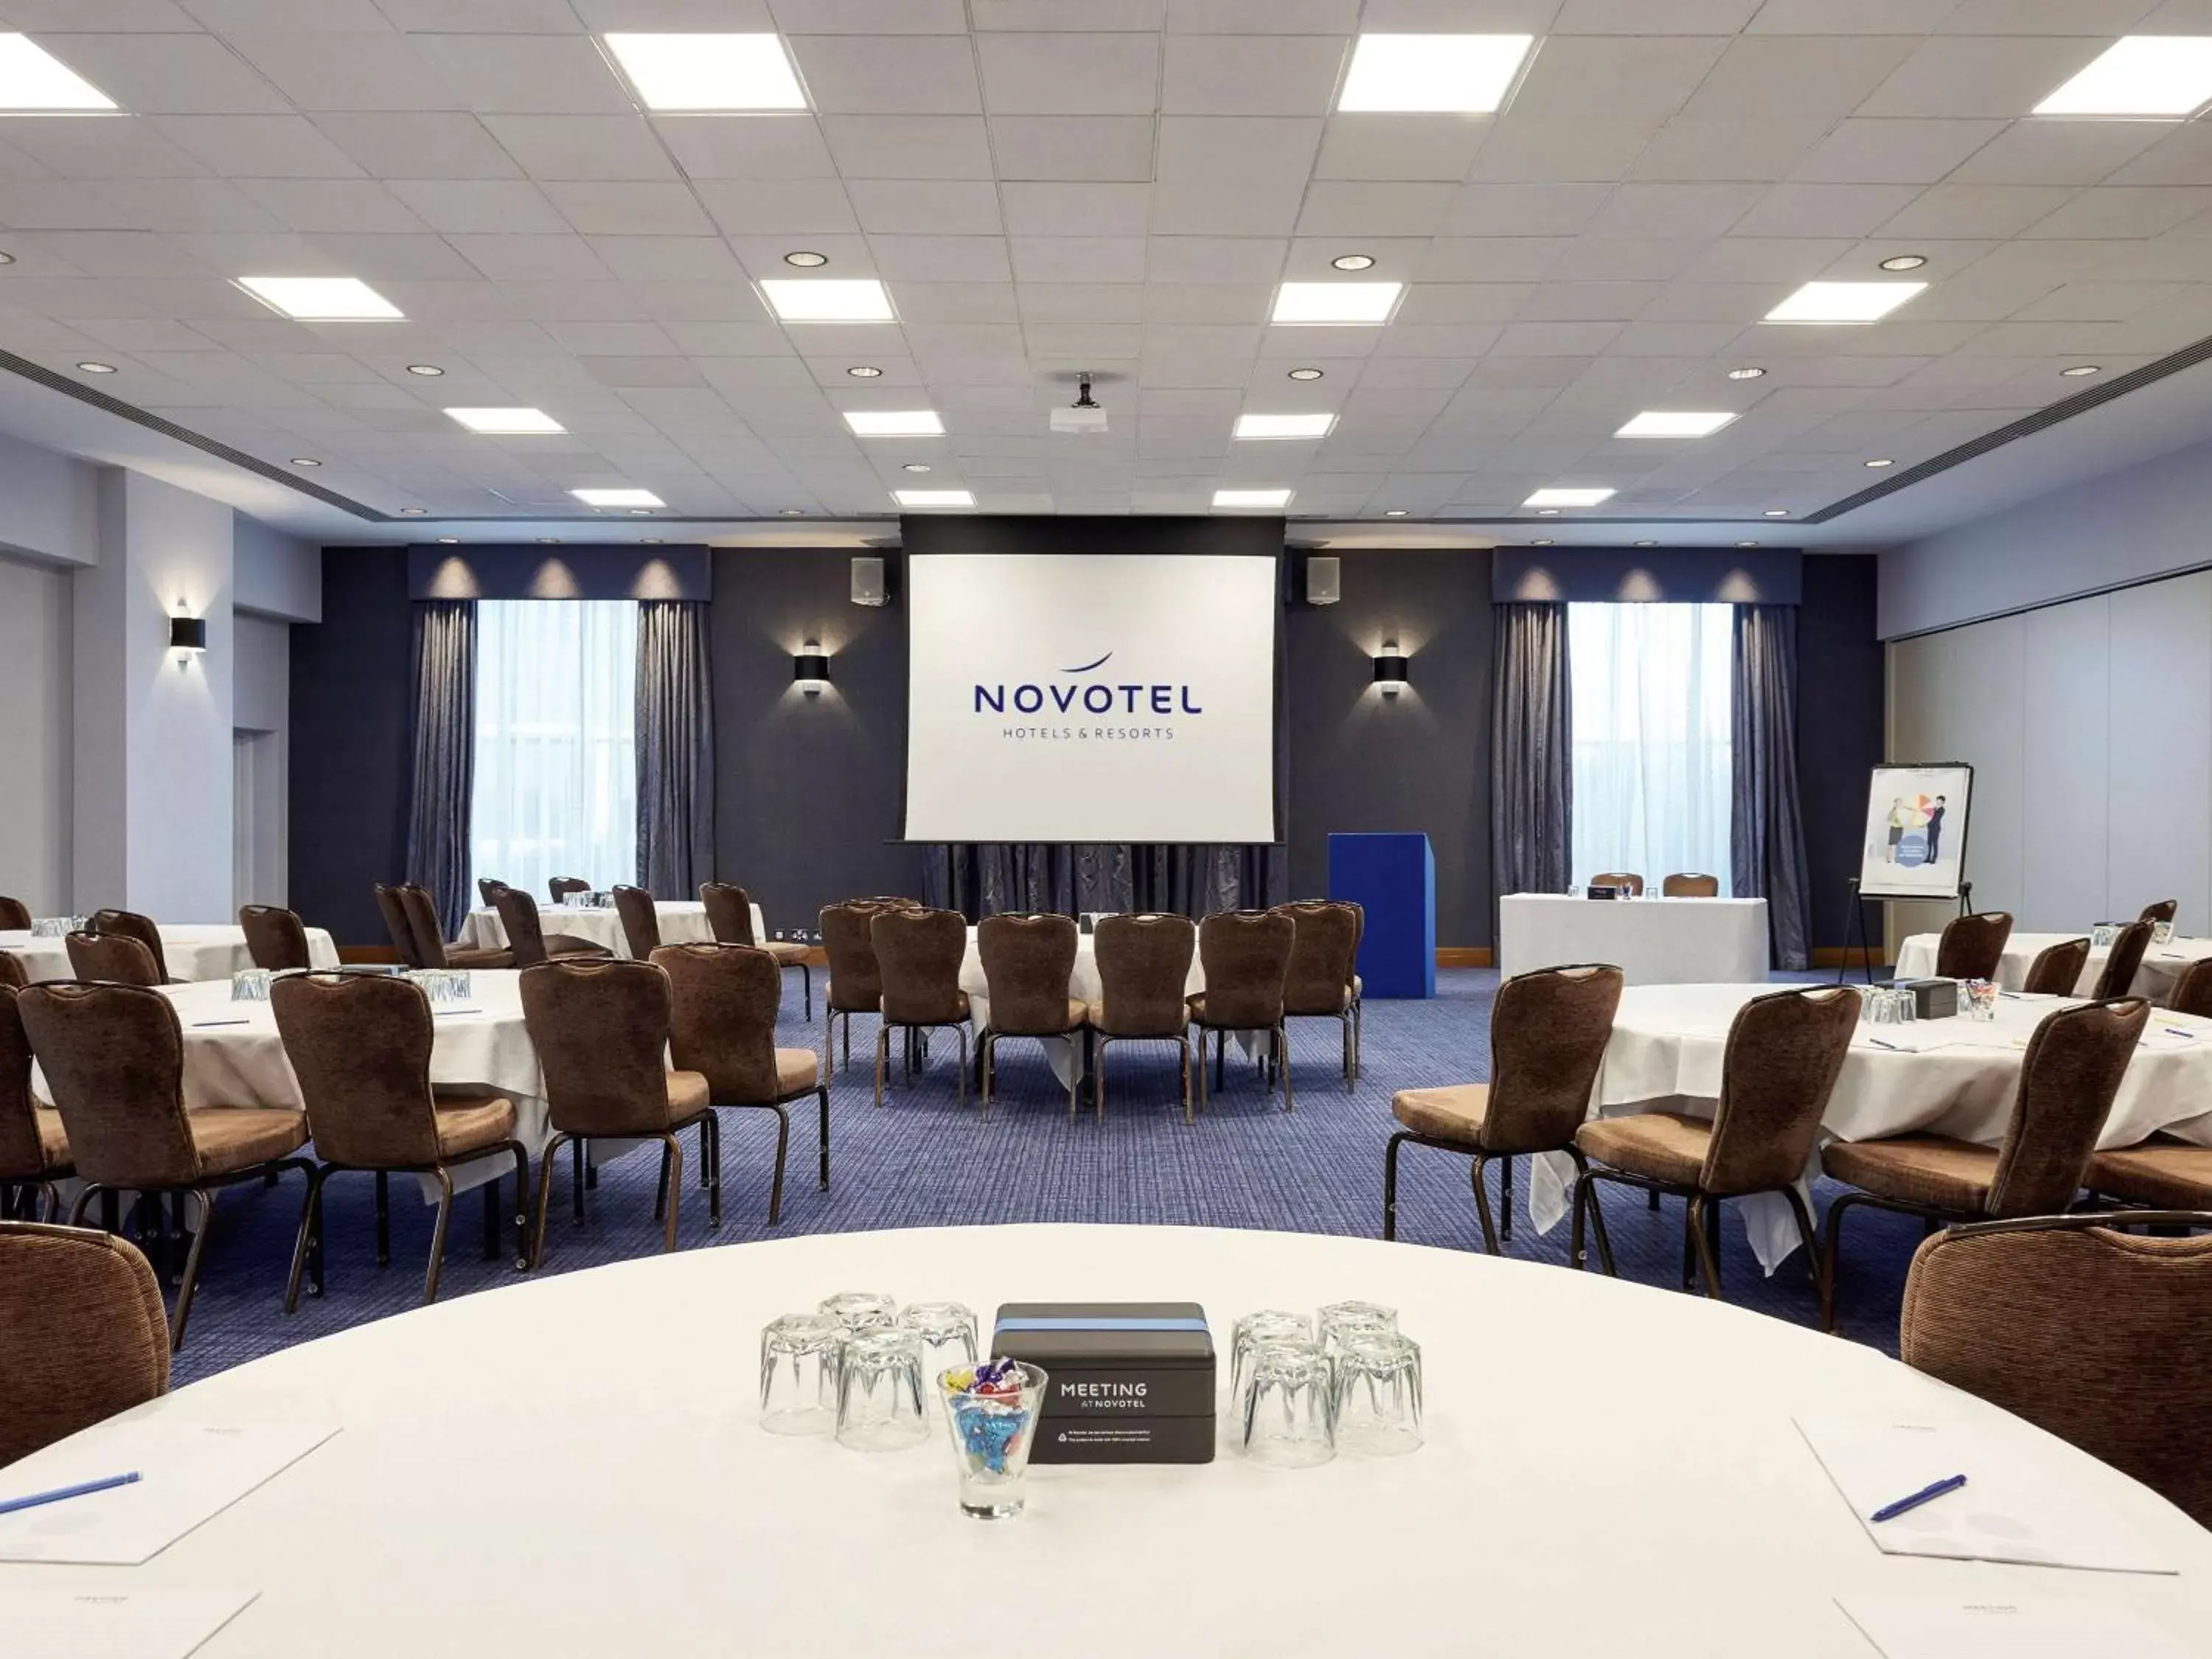 Property building in Novotel London Stansted Airport